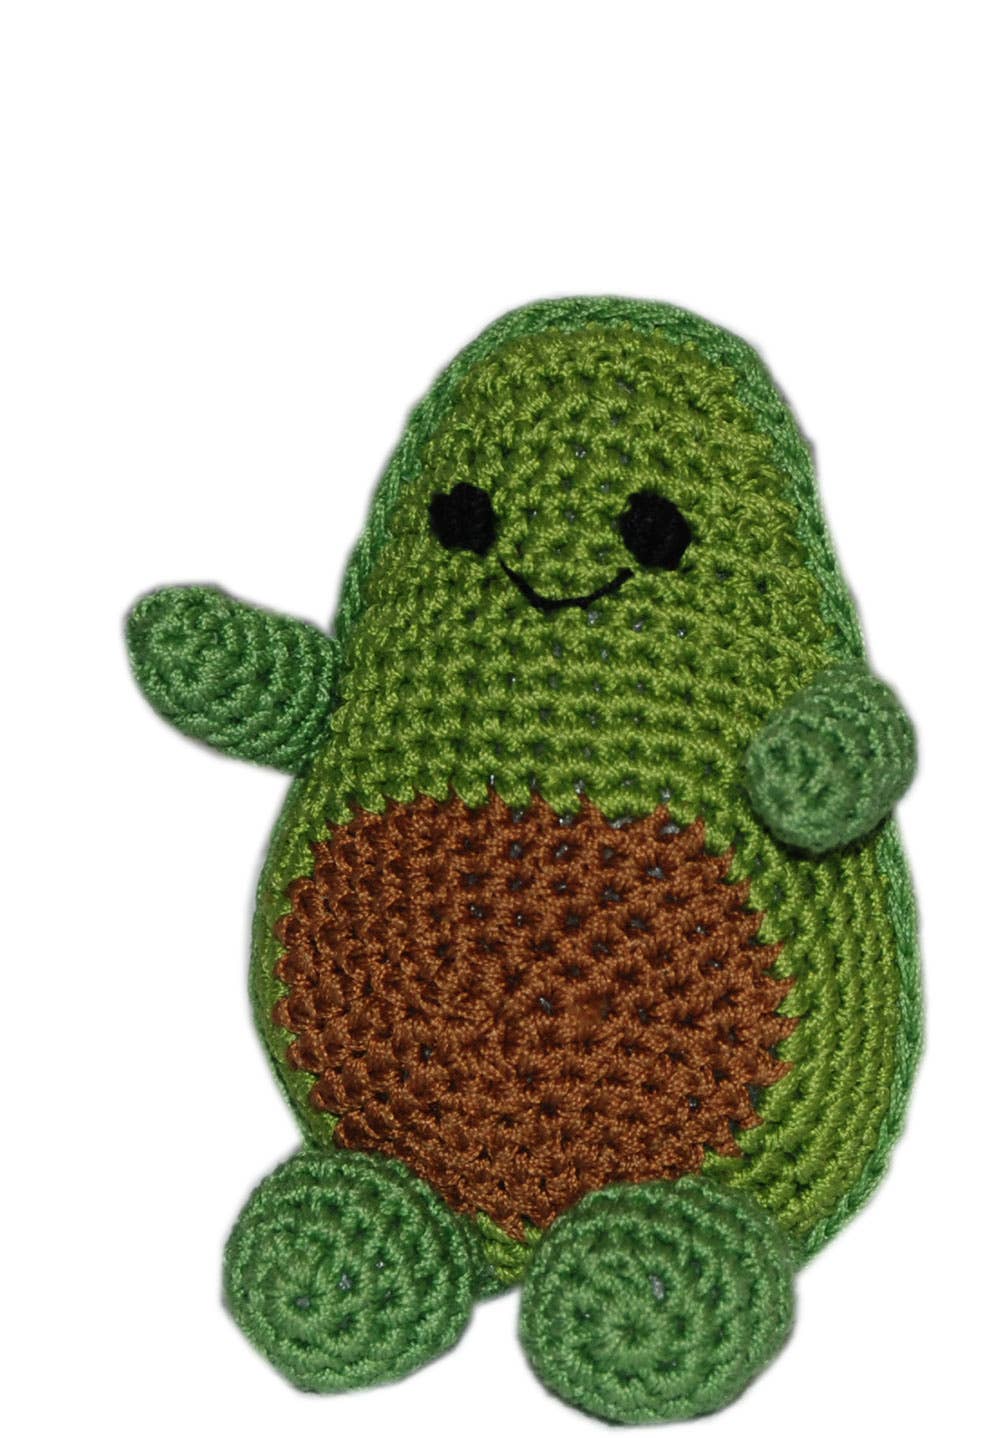 Load image into Gallery viewer, Knit Knack Foodies Organic Cotton Toys Avacado Image
